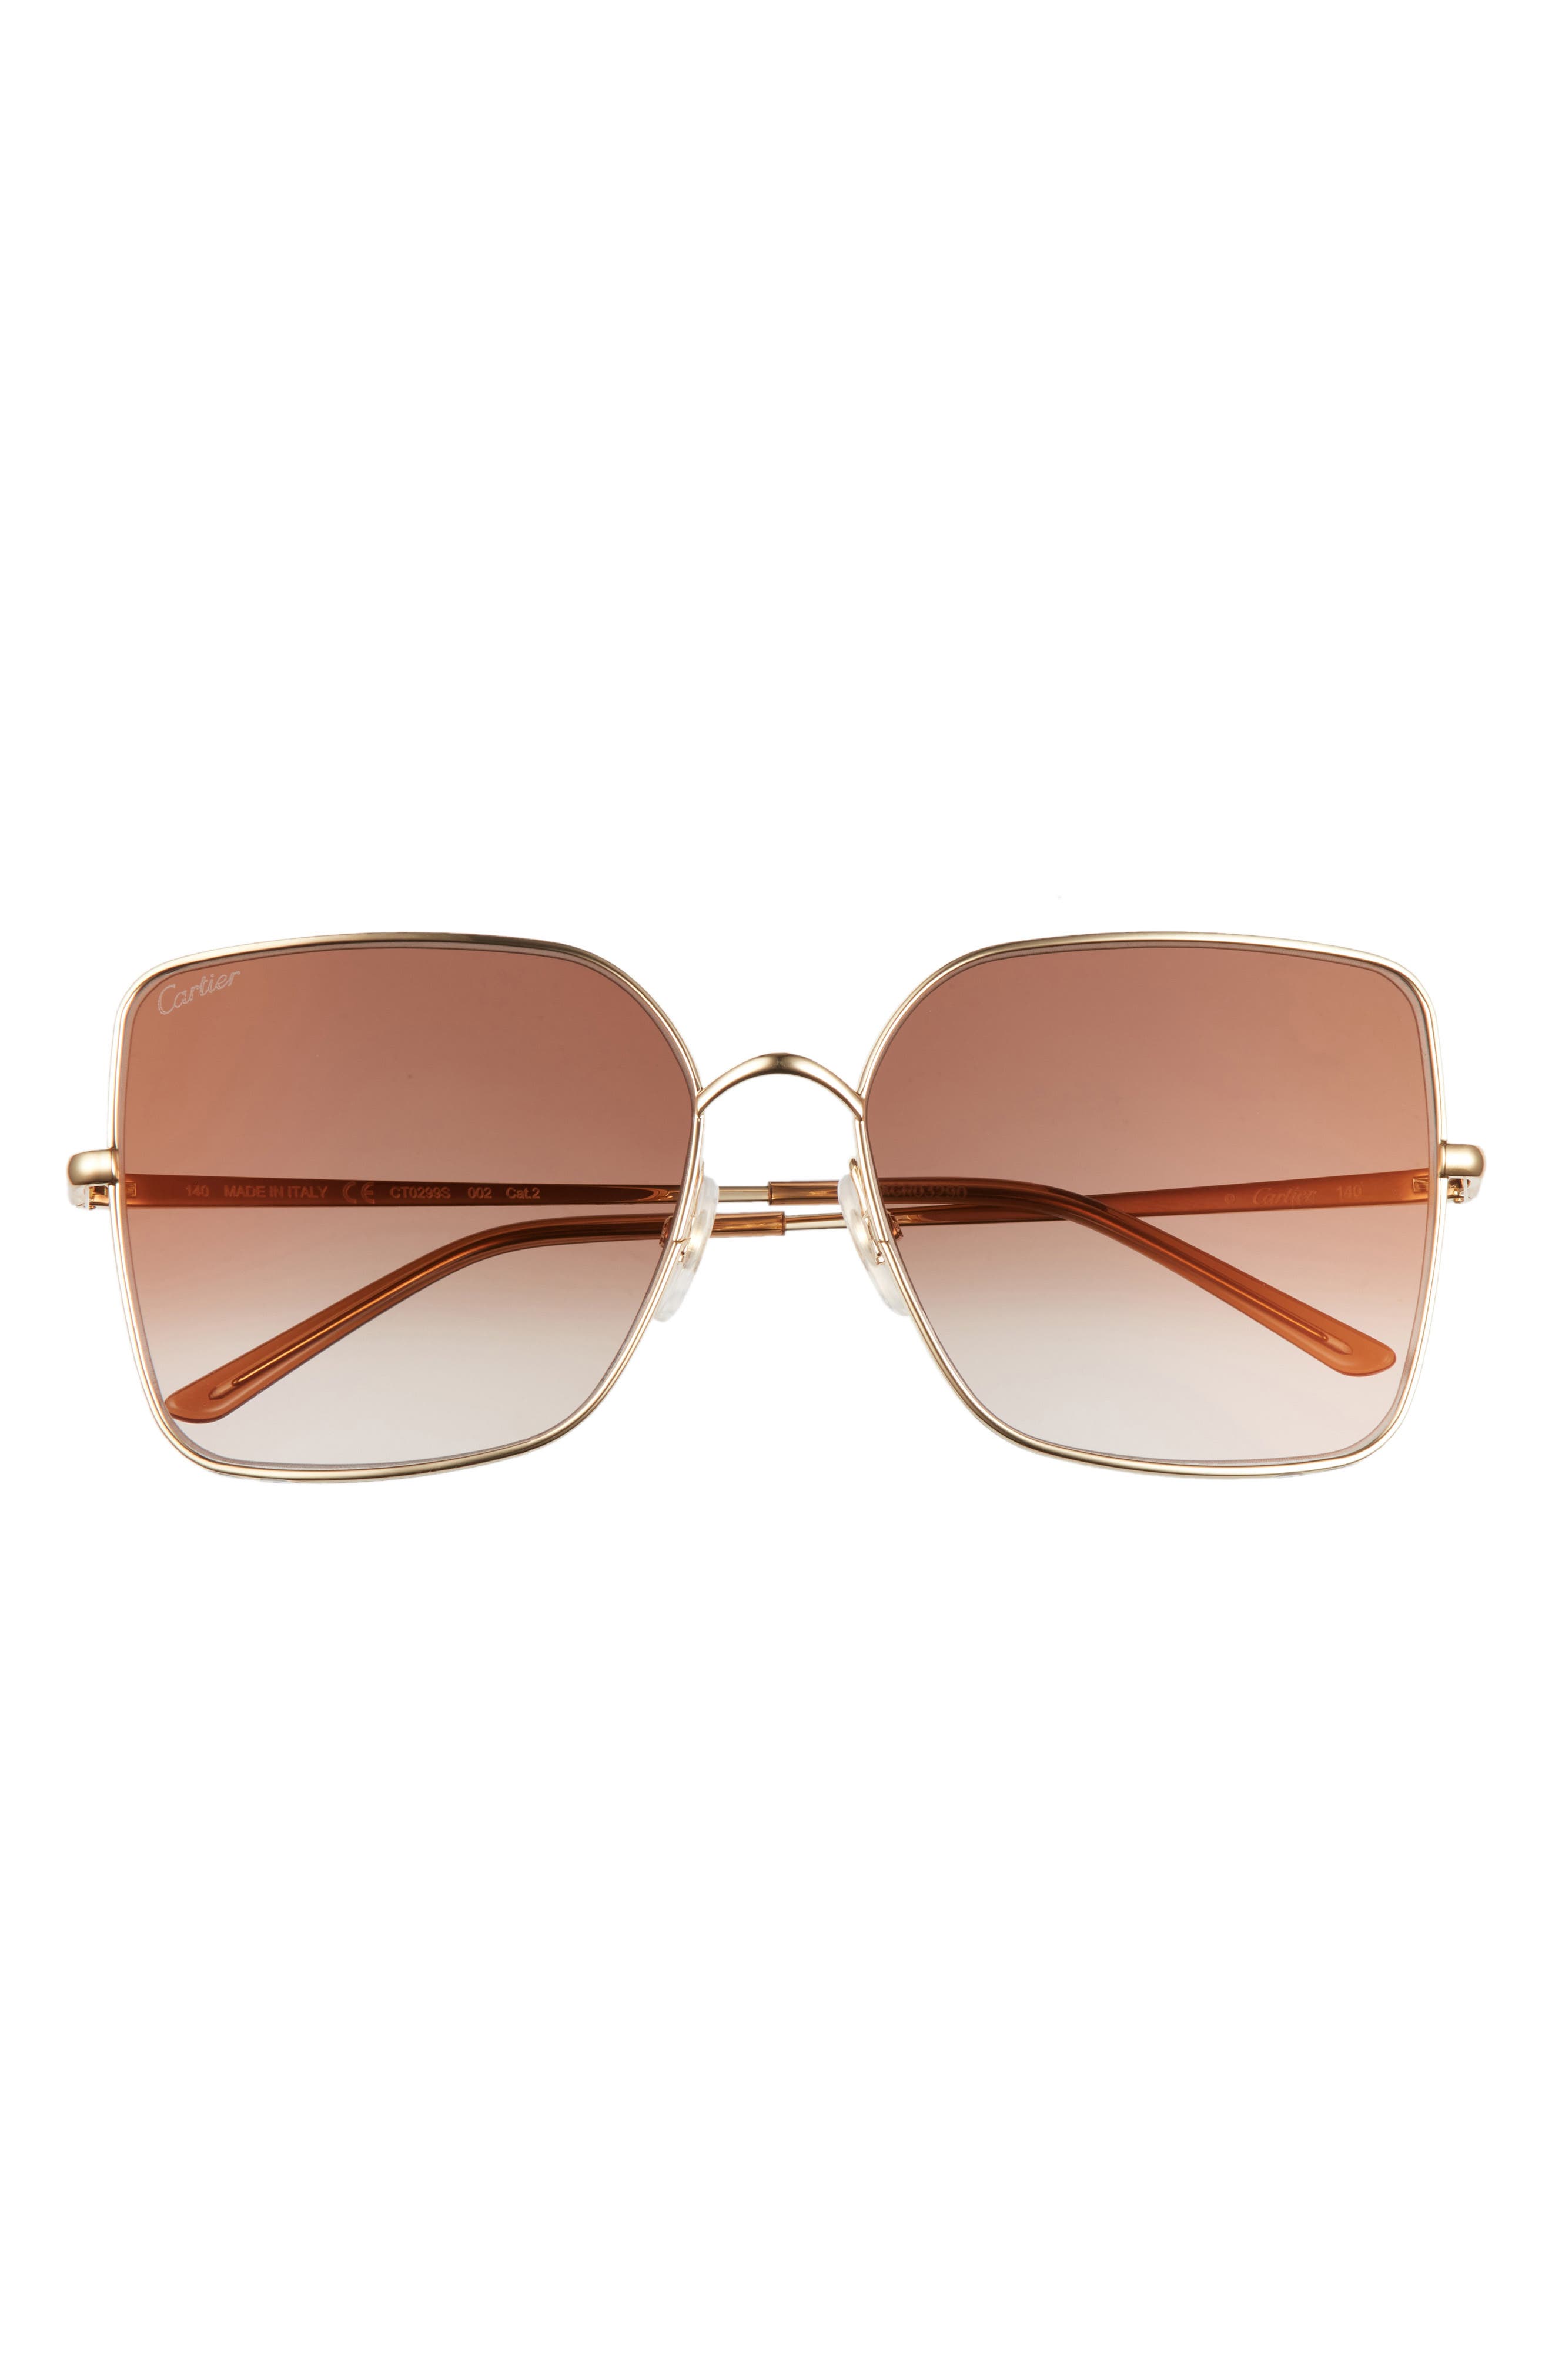 Cartier 59mm Square Sunglasses in Gold/Brown at Nordstrom